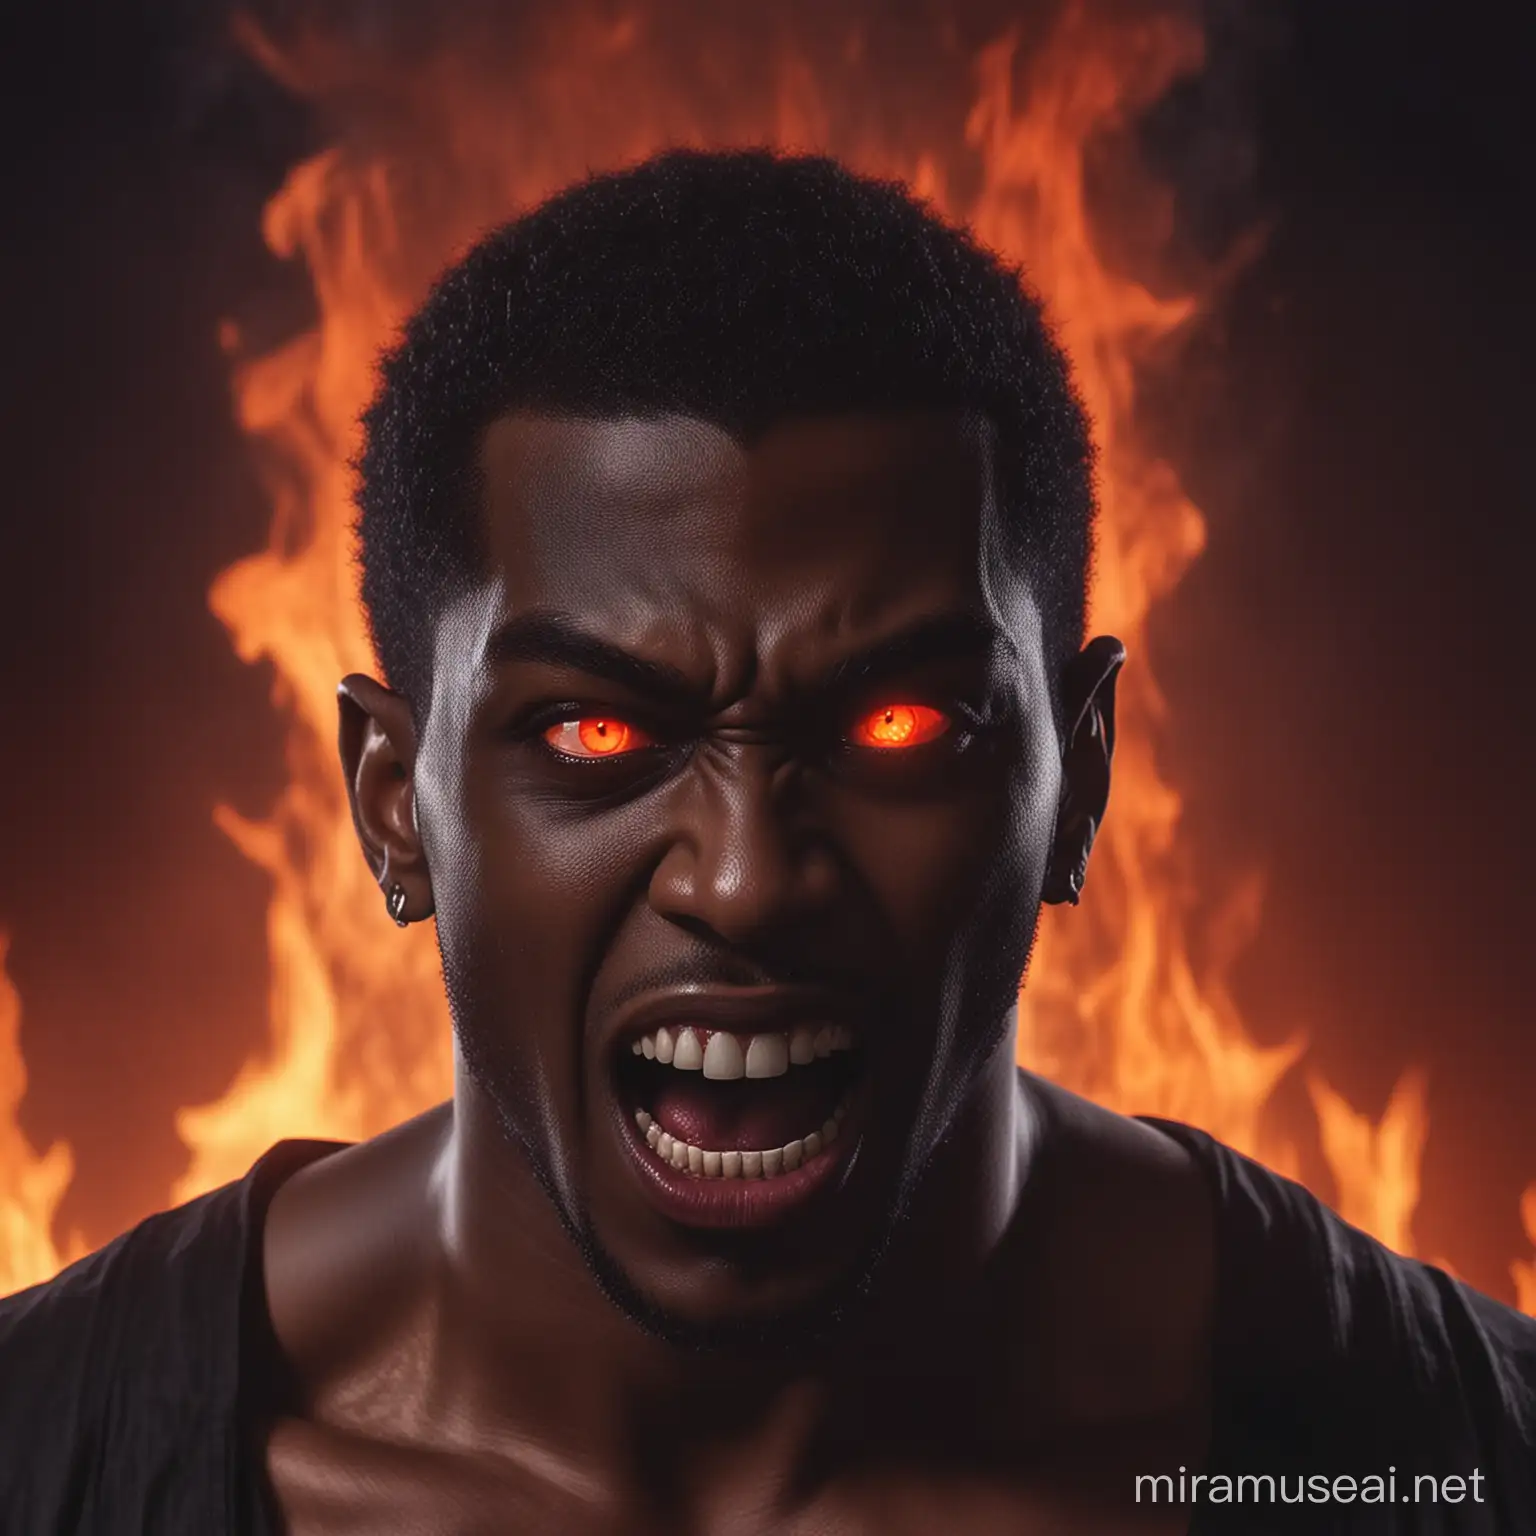 black Vampire man, mouth open, fangs showing, glowing red eyes, fire in the background

